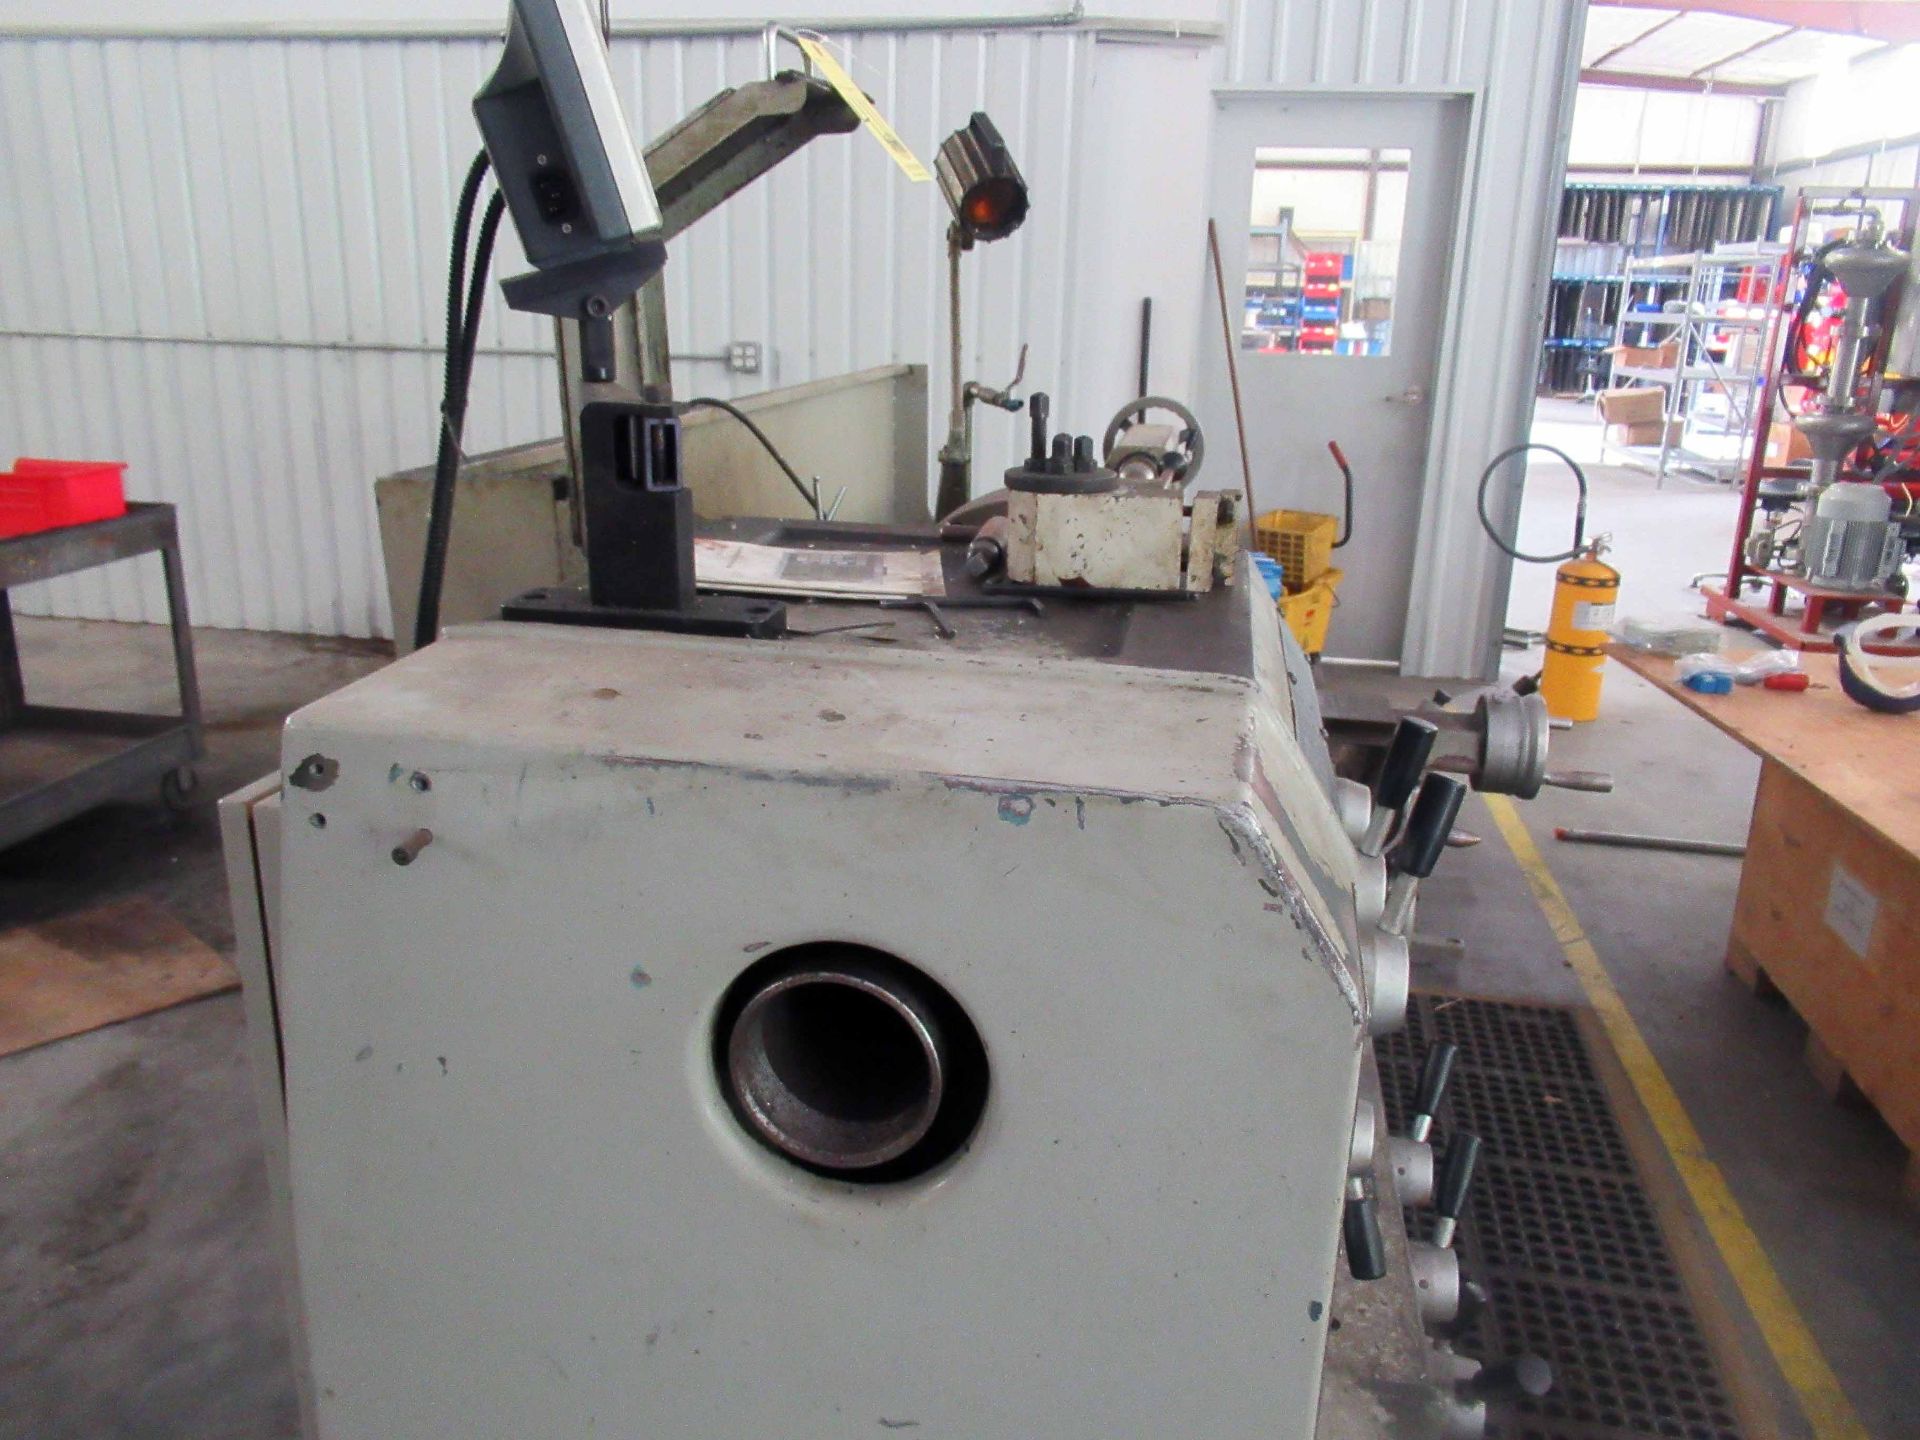 GAP BED ENGINE LATHE, SHARP 20" X 60" MDL. 2060C, new 2008, Fagor D.R.O., 12.5" dia. 3-jaw chuck, - Image 6 of 7